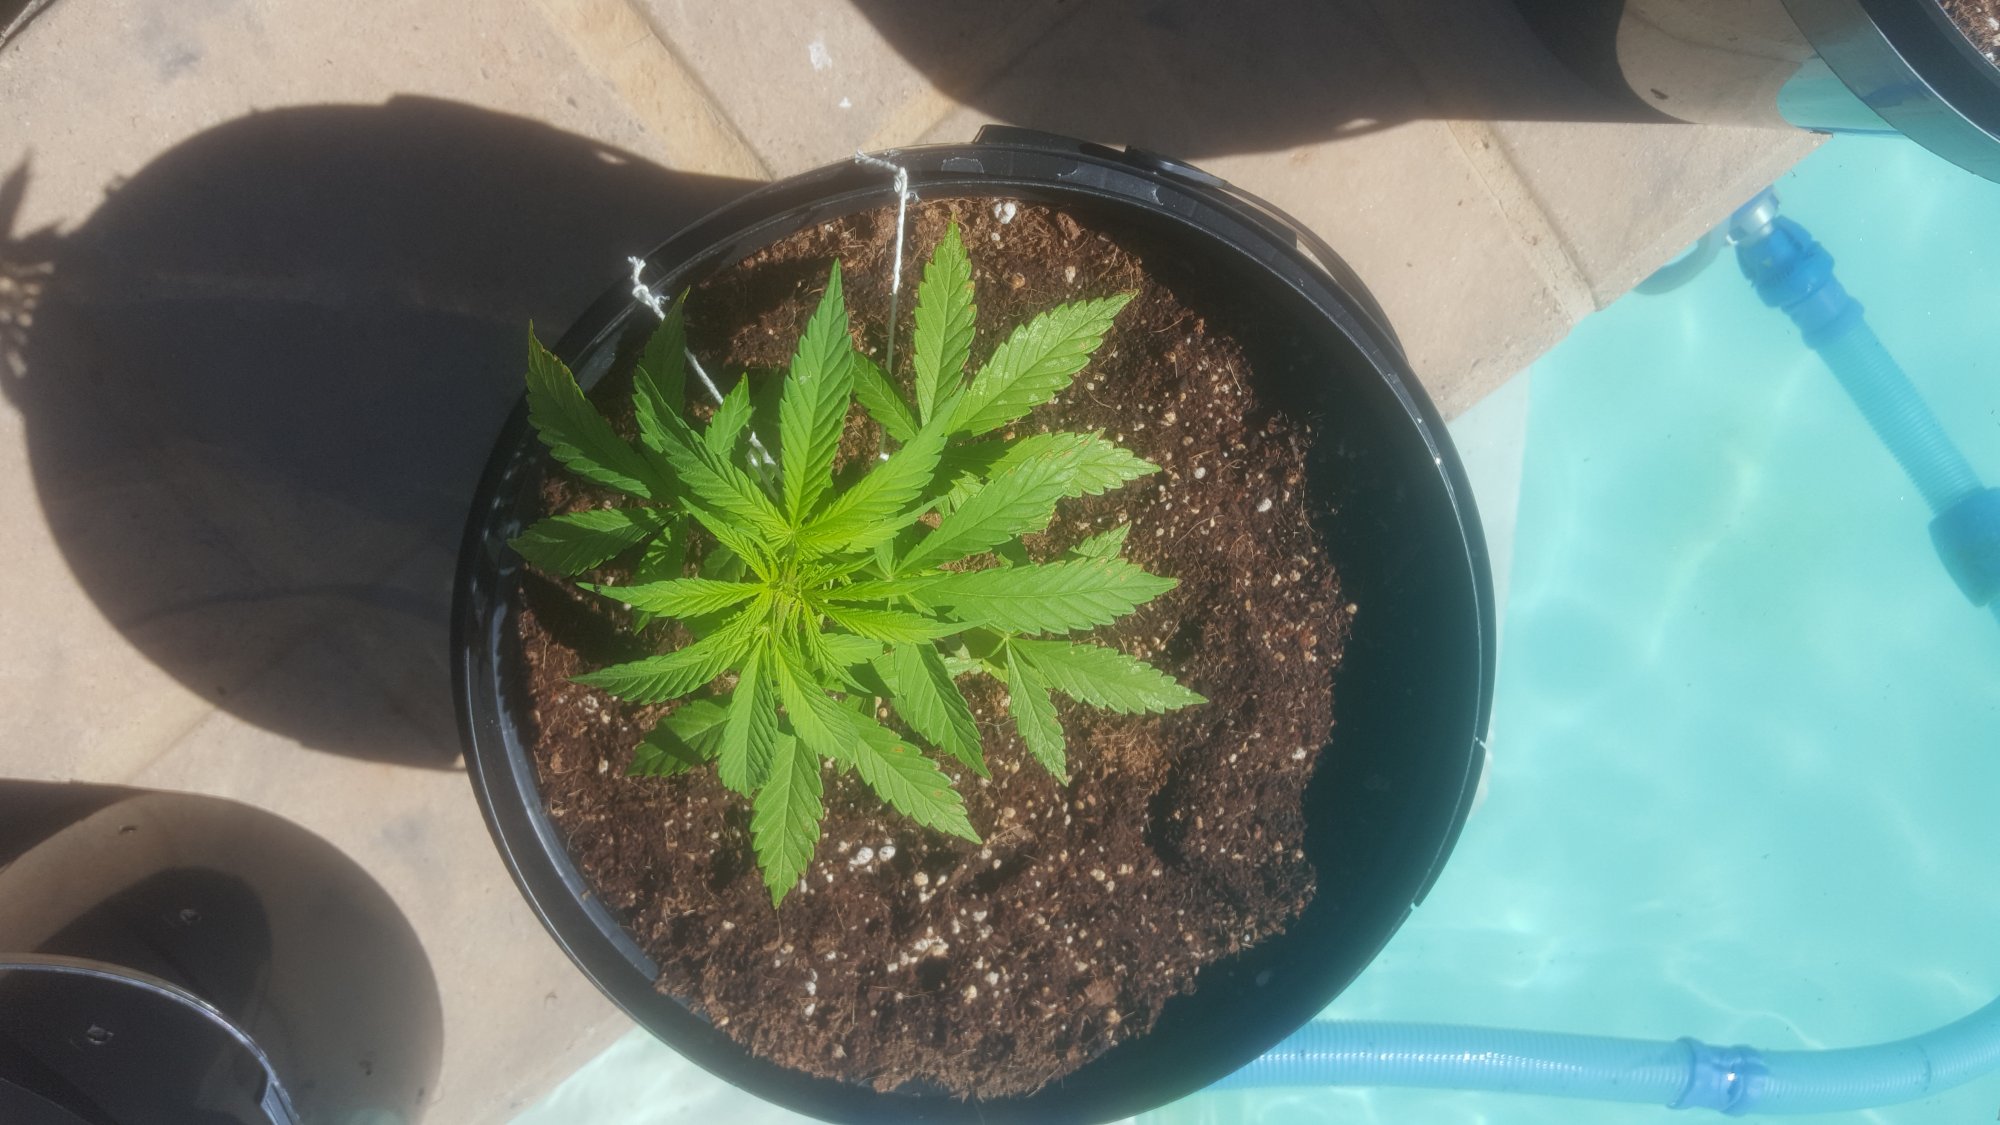 My current grows 4 weeks old 2